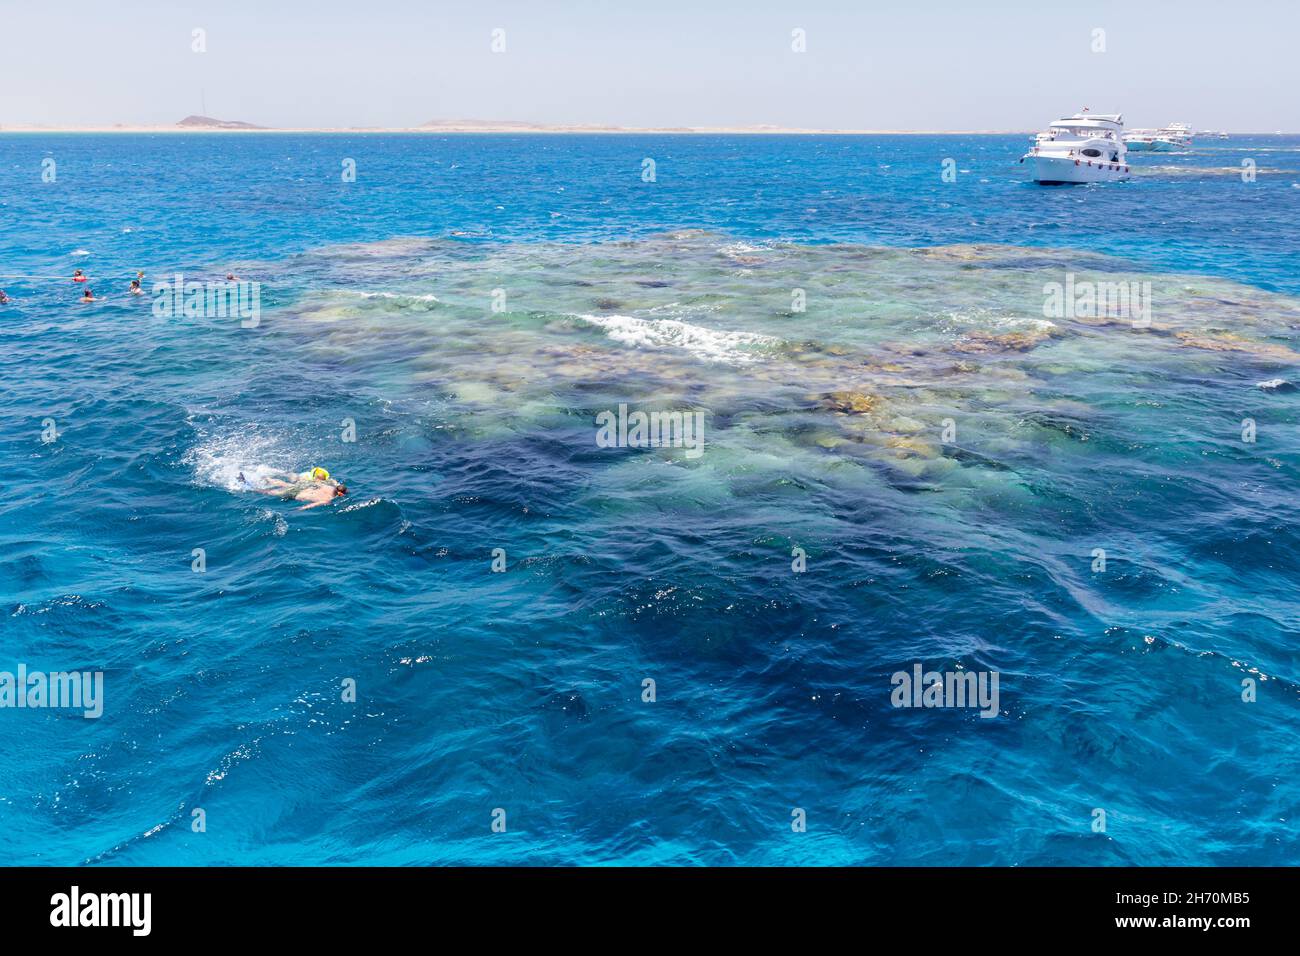 SHARM EL SHEIKH, EGYPT - JUNE 7, 2021: Luxury yachts with tourists in a bay of the Red Sea in Sharm El Sheikh in Egypt. Some tourists are snorkeling t Stock Photo